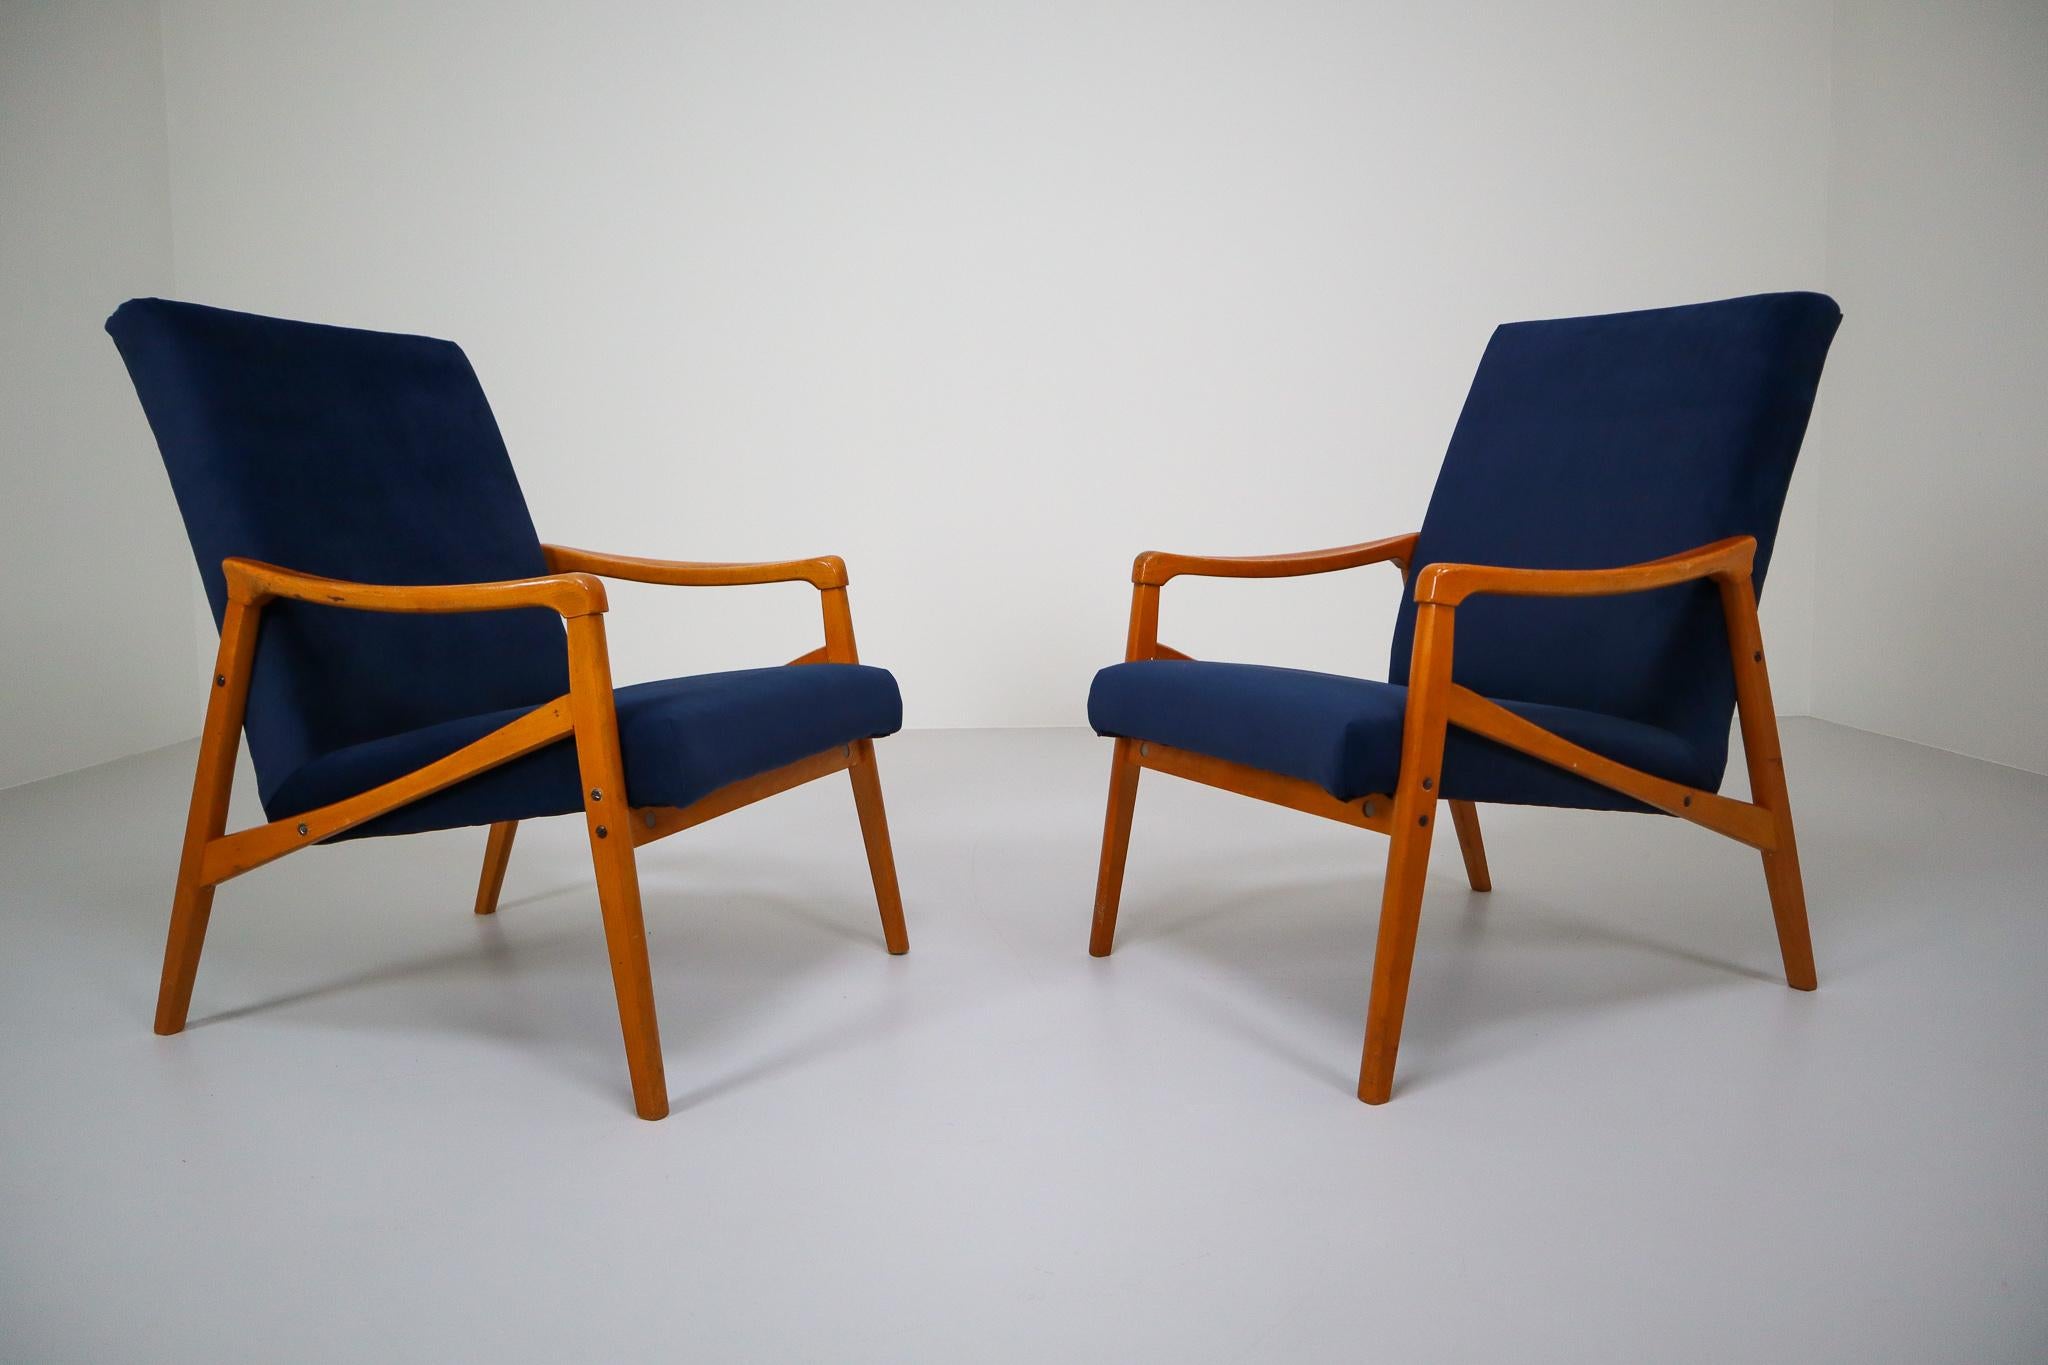 Pair of original vintage midcentury armchairs / lounge chairs manufactured and designed in Czech Republic, 1970s. Made of beechwood and professionally reupholstered in blue velvet. These armchairs would make an eye-catching addition to any interior